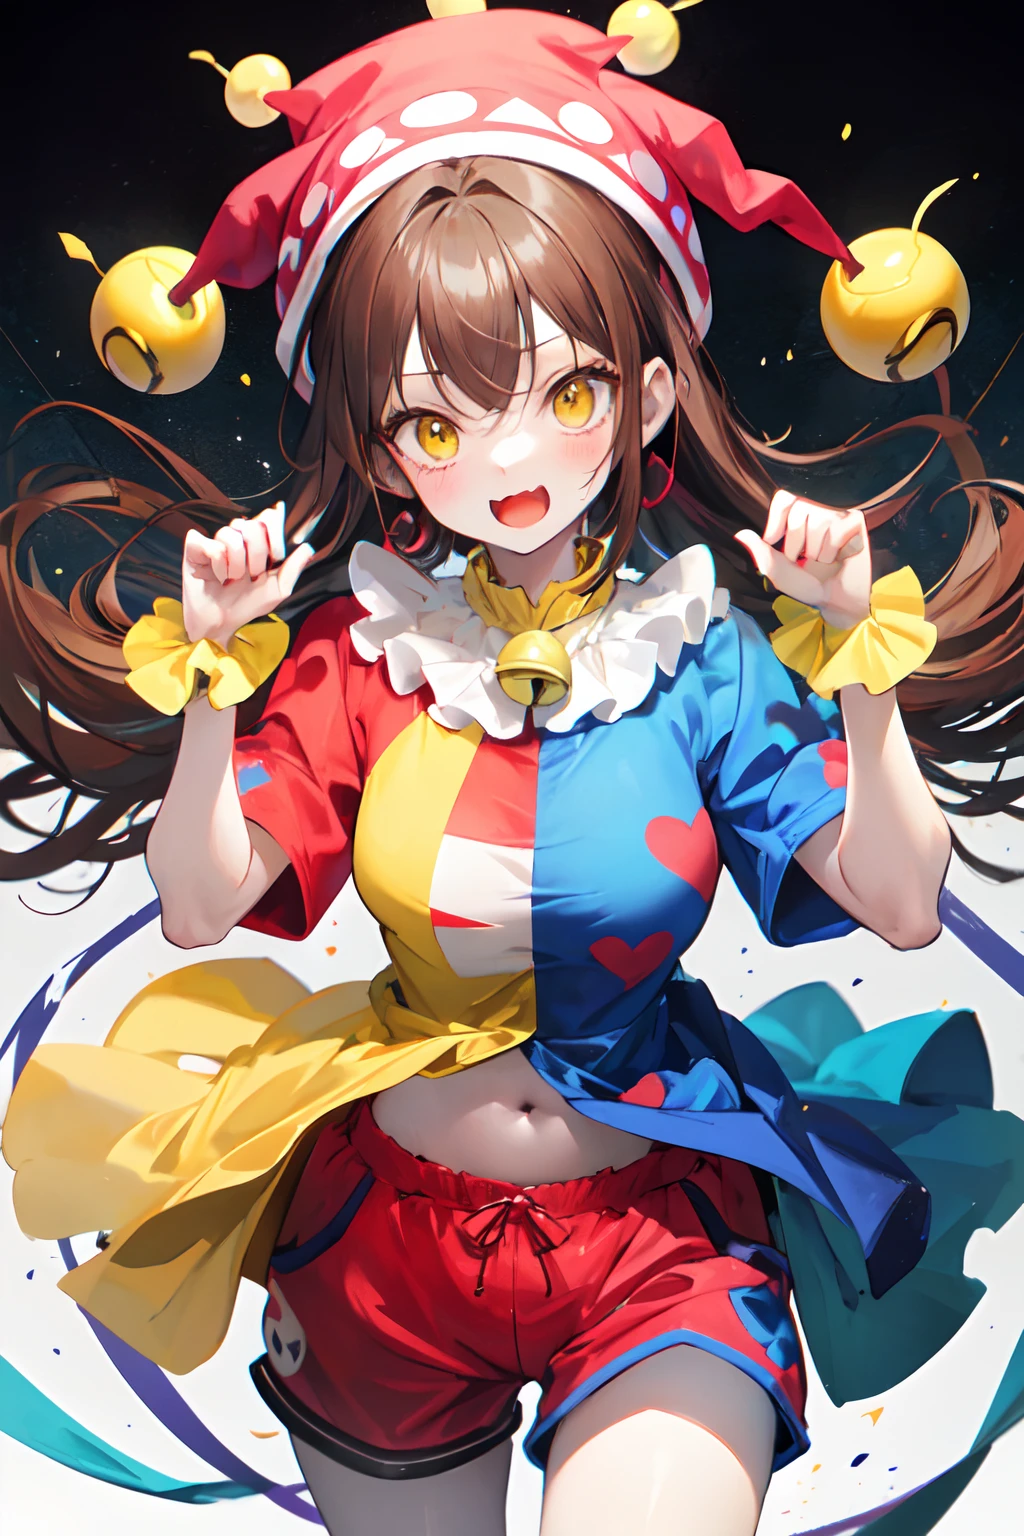 clown girl in red and blue style jester whole body covered outfit in shorts with yellow bottons, brown hair, red and blue 2headed jester hat with yellow bells, white skin make up, scared face